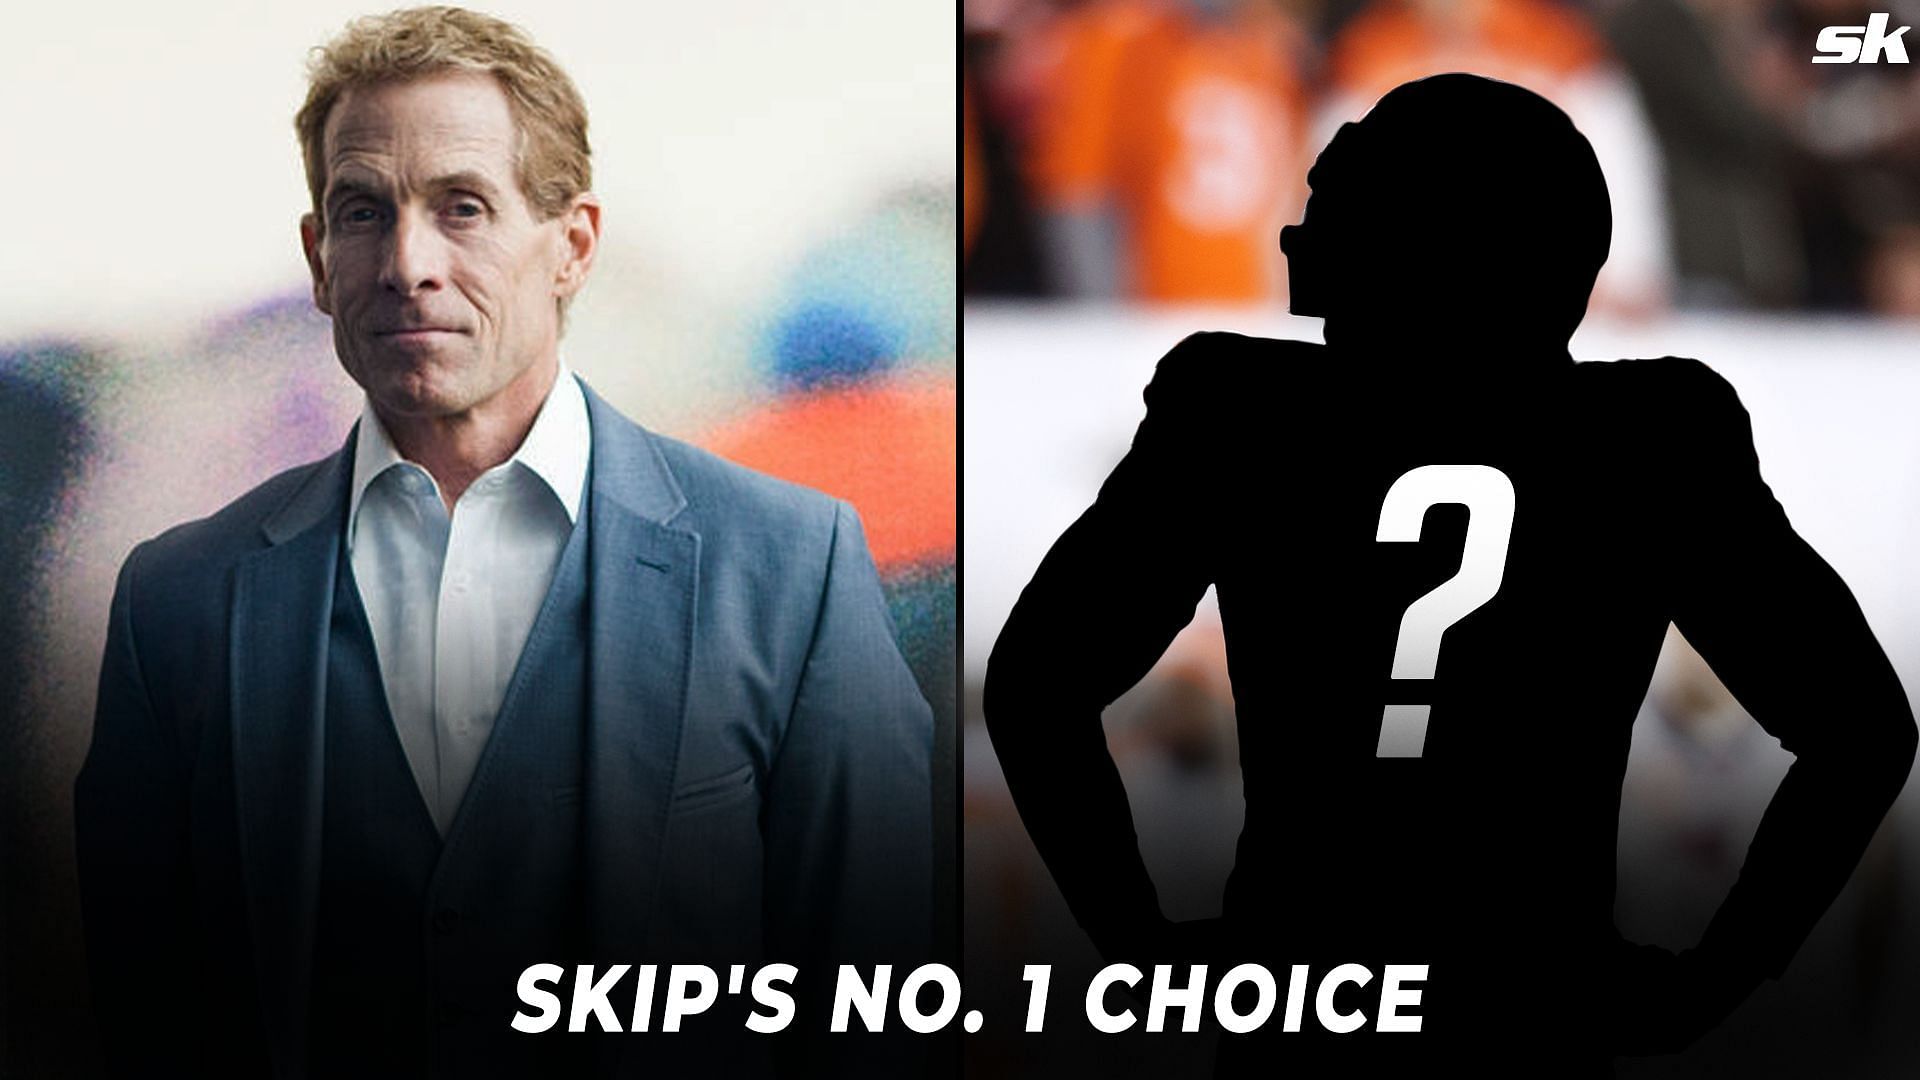 Skip Bayless, co-host of Fox Sports One Show Undisputed